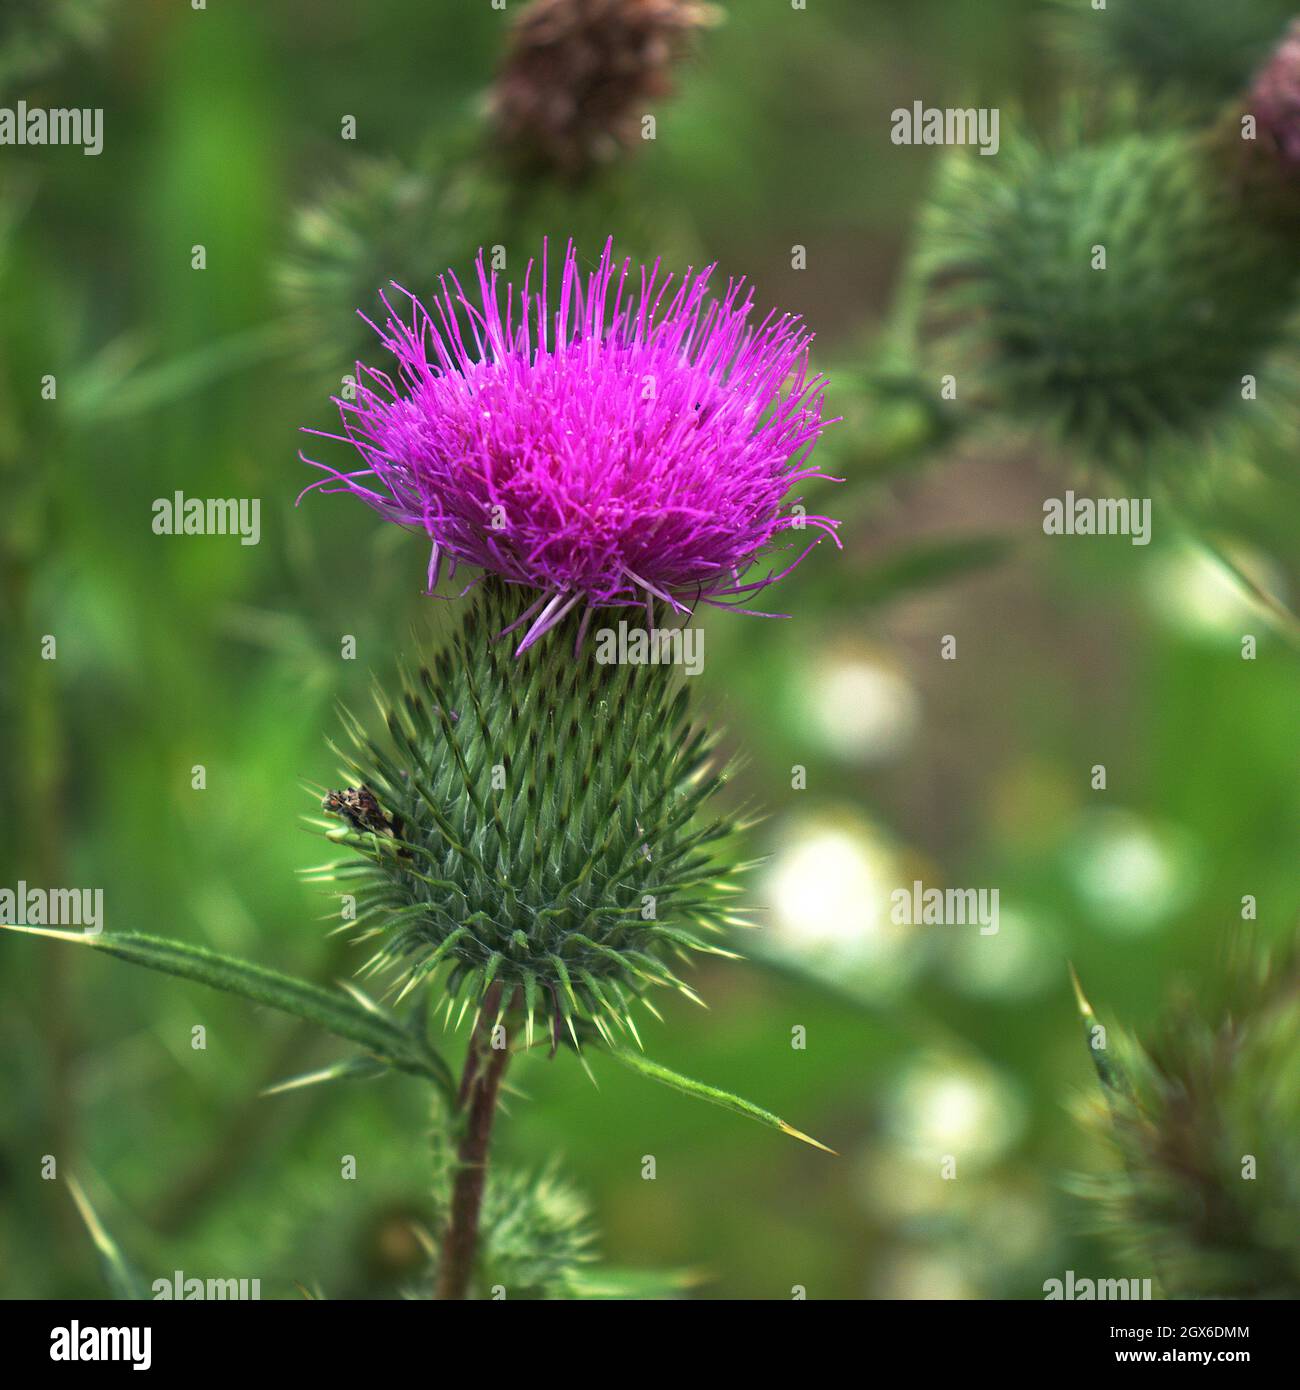 The pink strings of the flower on a green base is wildflower beauty Stock Photo